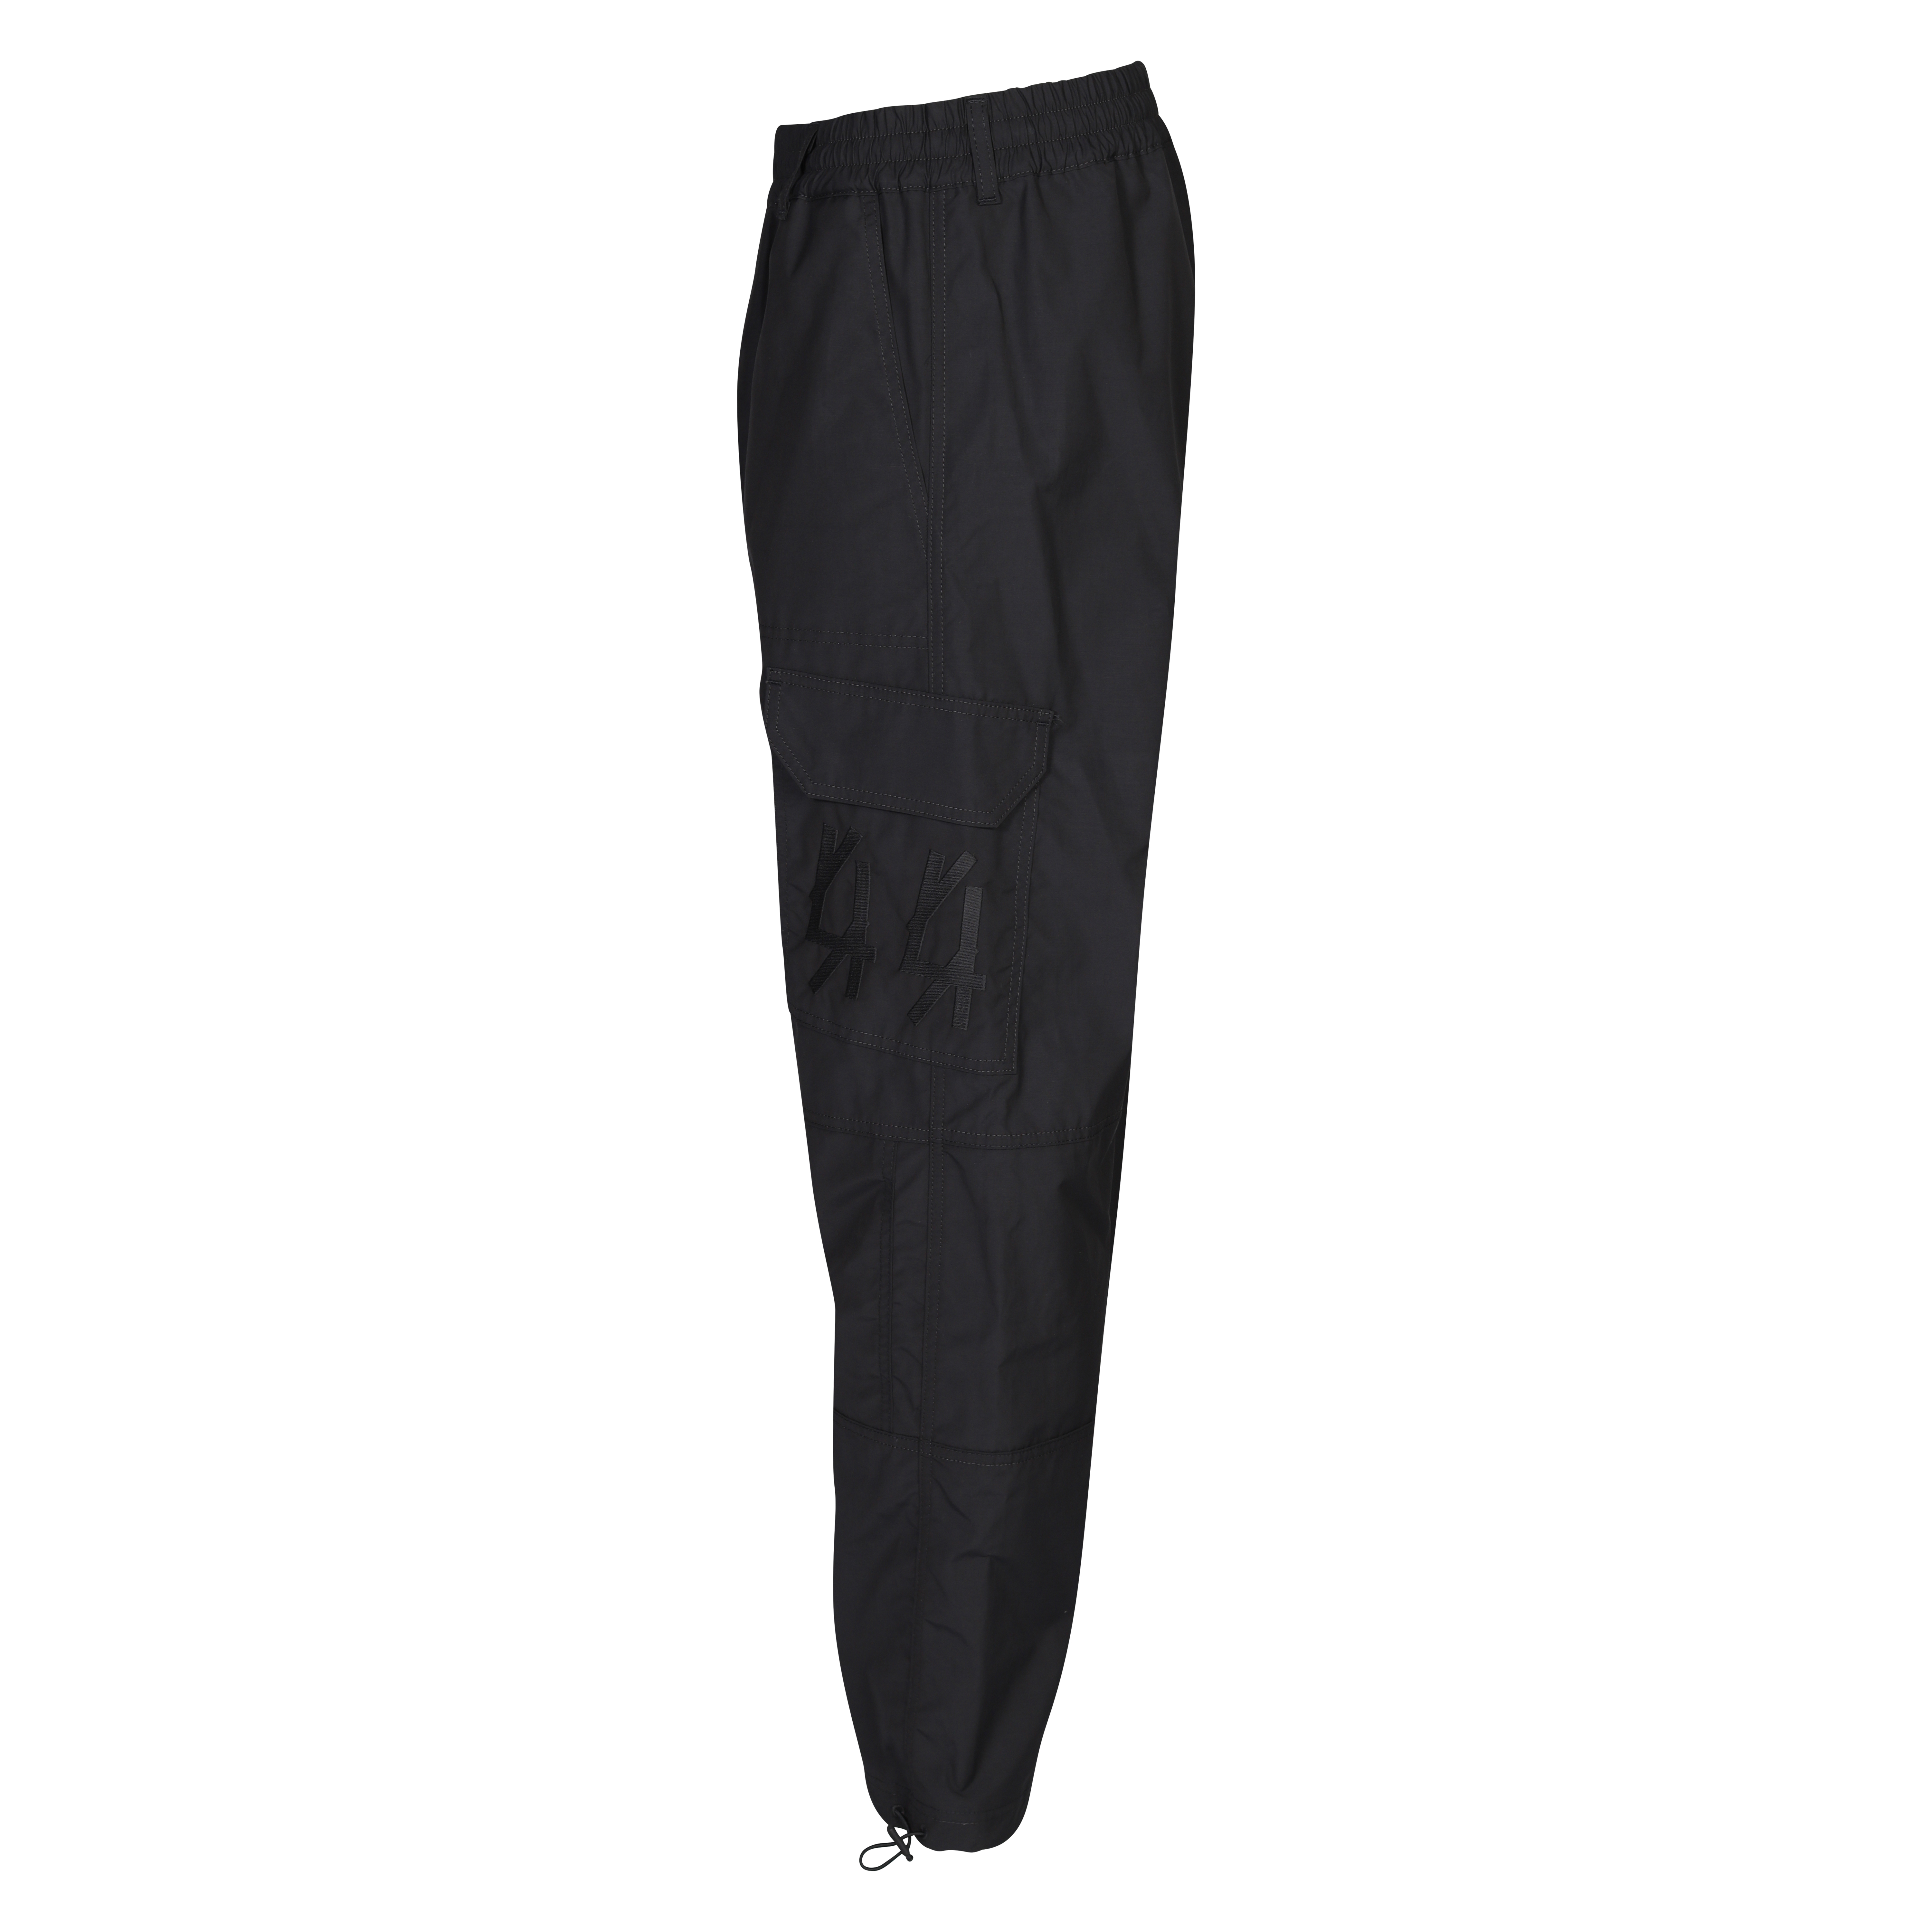 44 Label Group Think Solid Cargo Trousers in Black 46